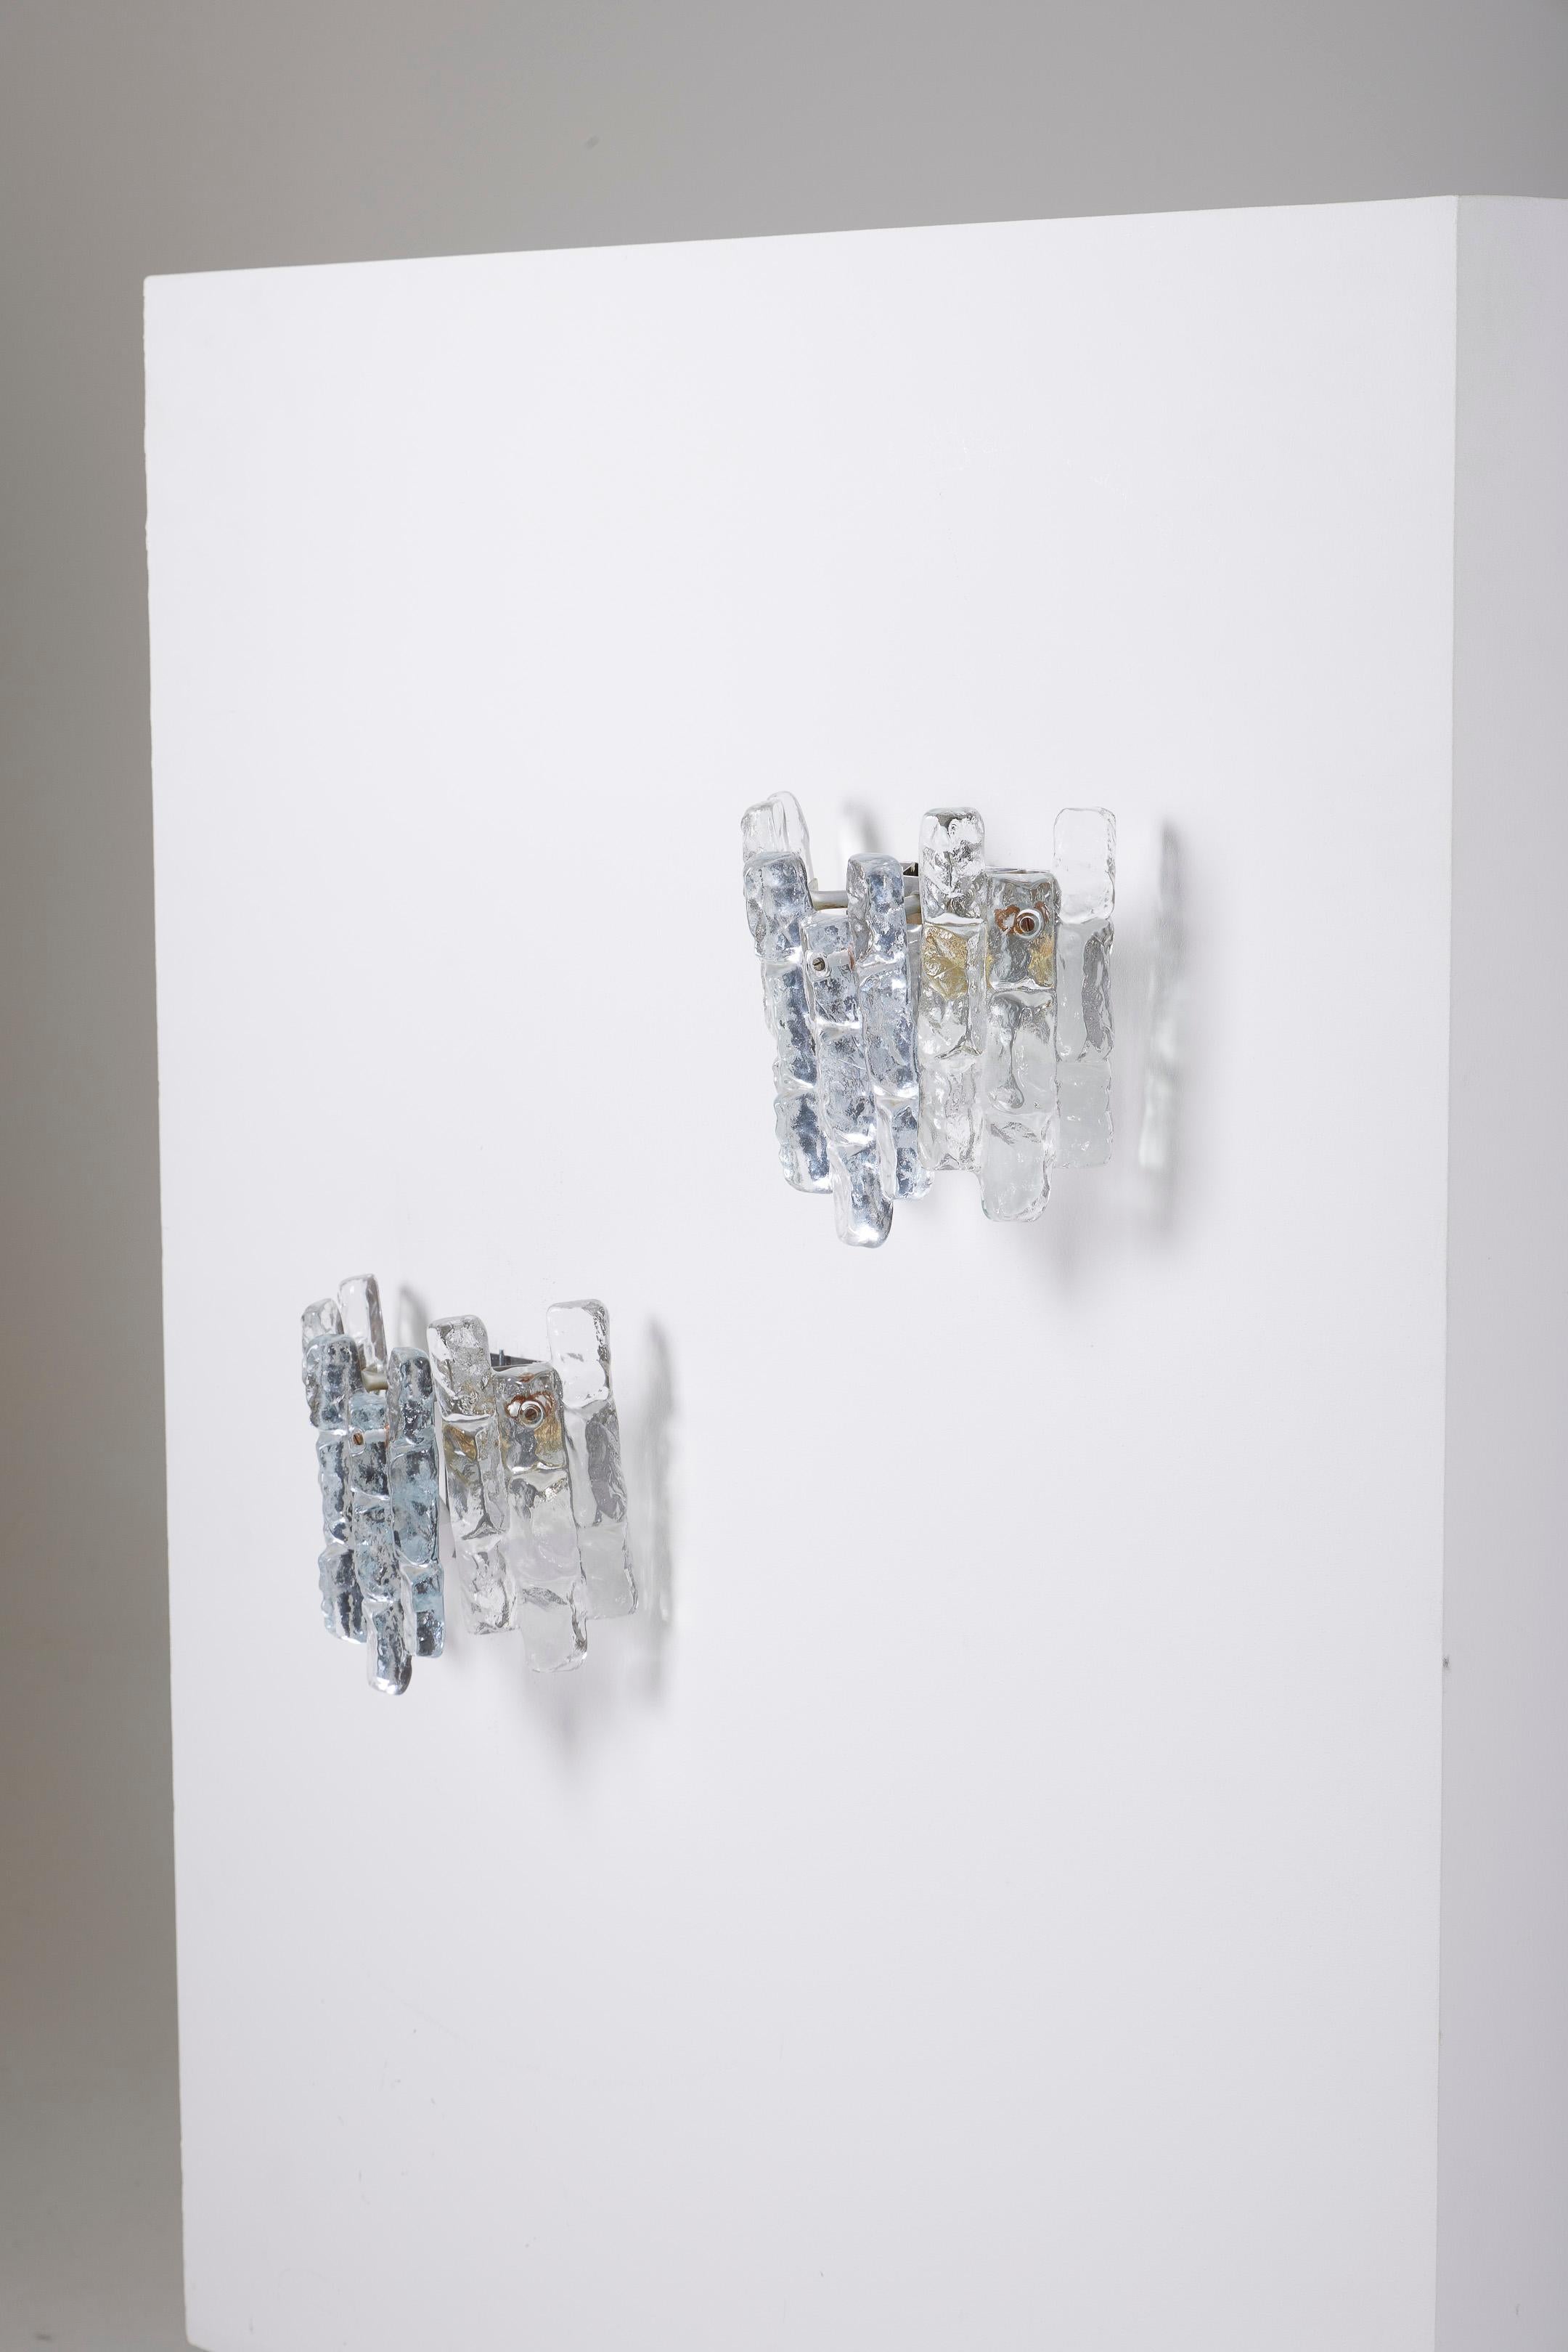 Pair of Sierra Ice glass wall sconces by designer Julius Theodor Kalmar (1884-1968) for Kalmar Franken KG, Austria, dating back to the 1960s. The relief glass creates a beautiful luminous effect when the sconces are lit. Overall very good